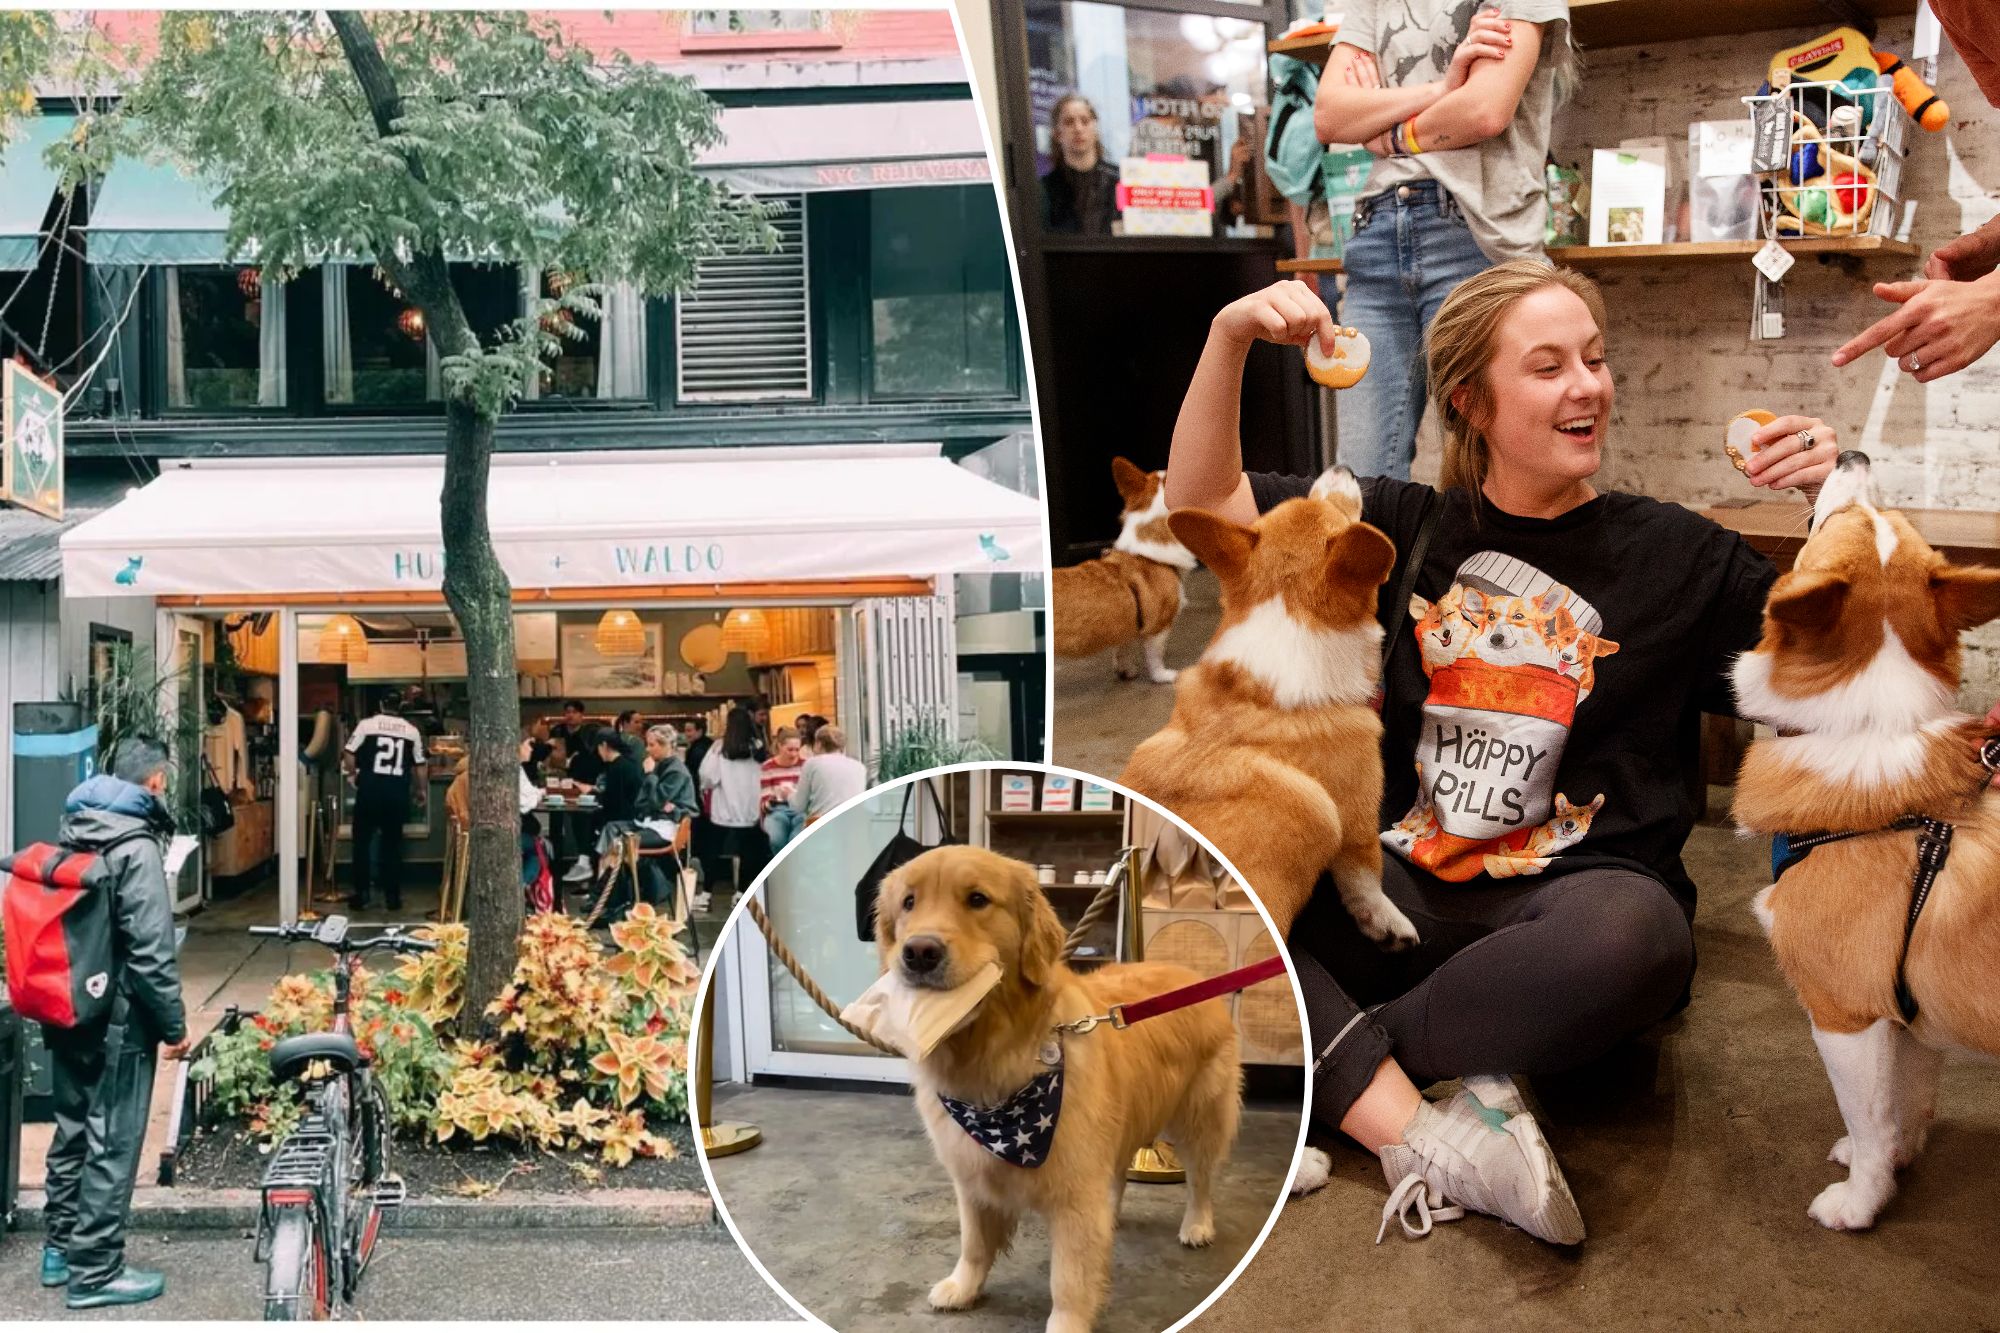 To get your day started on a paw-sitively wonderful note, head to these dog-friendly haunts where pups are welcomed with tail-wagging treats, a chance to make friends and even special events.